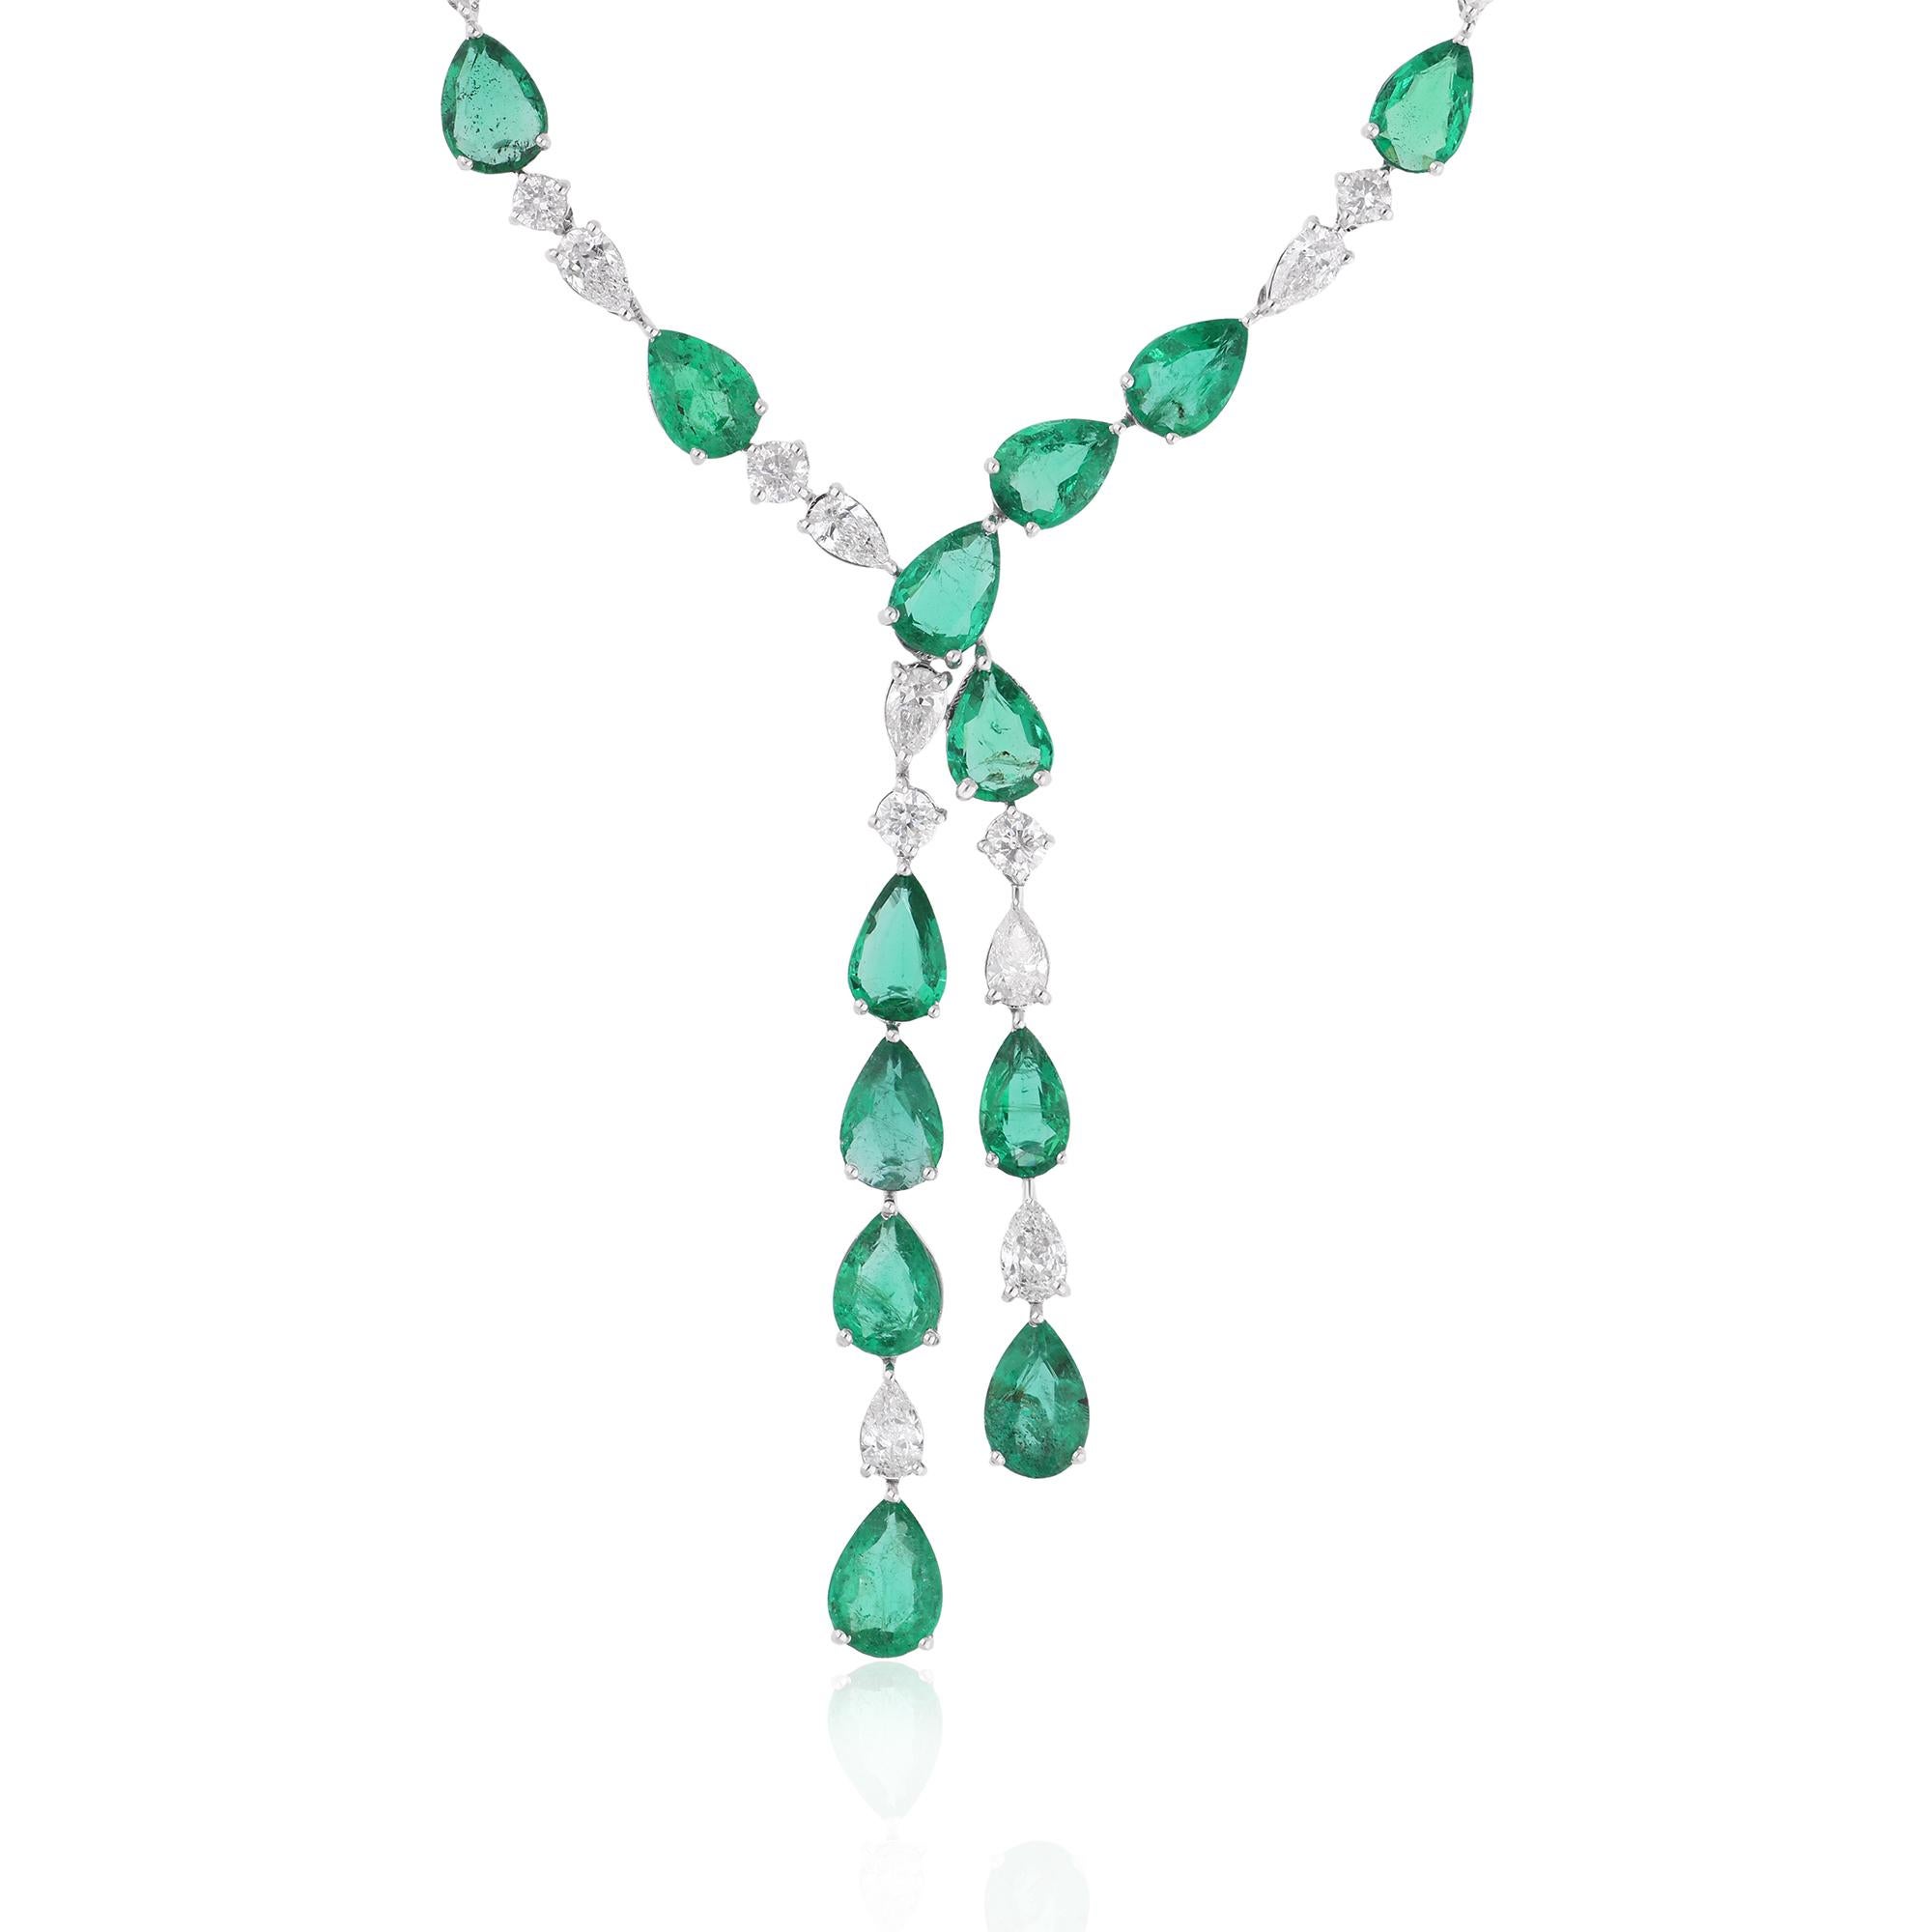 Surrounding the emerald are sparkling diamonds, meticulously set to enhance its beauty and create a mesmerizing display of light. The diamonds add a touch of glamour and sophistication to the design, accentuating the vibrant color of the emerald and